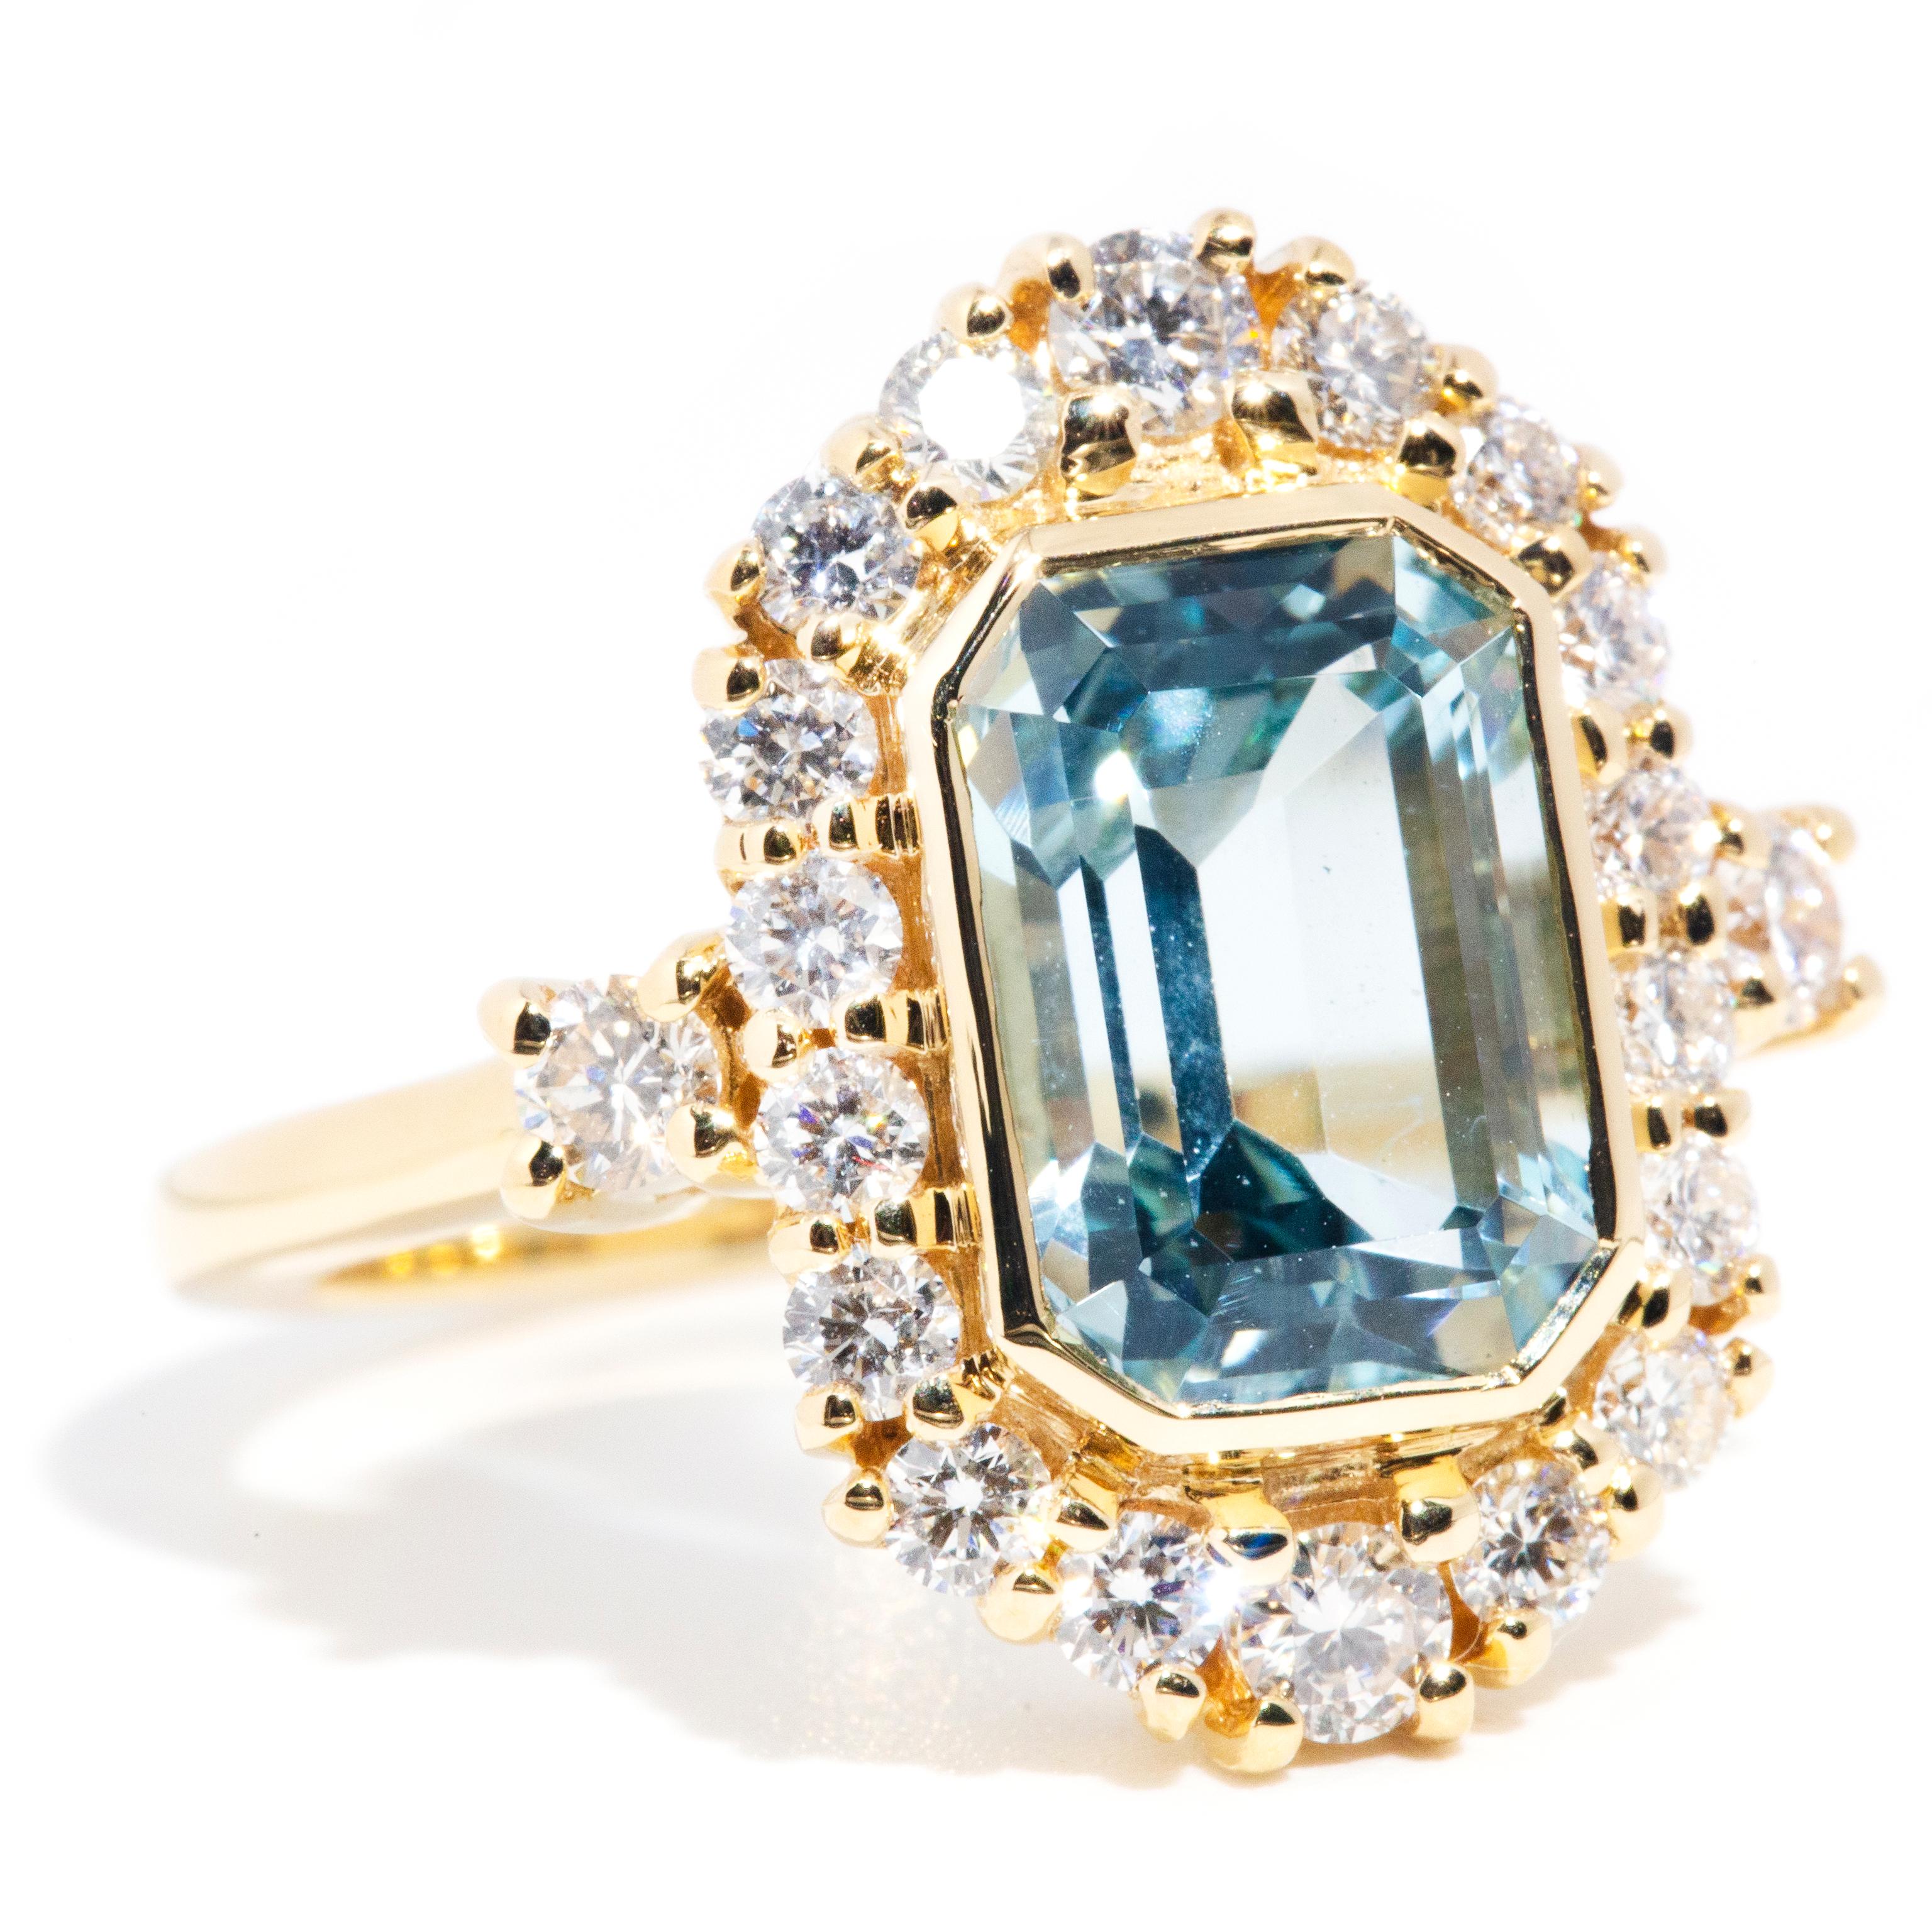 Crafted in 18 carat yellow gold, this stunning contemporary ring is breathtaking with her wonderous emerald cut aquamarine glowing in the centre and encompassed by a surrounding border of radiant round brilliant cut diamonds. This masterwork is